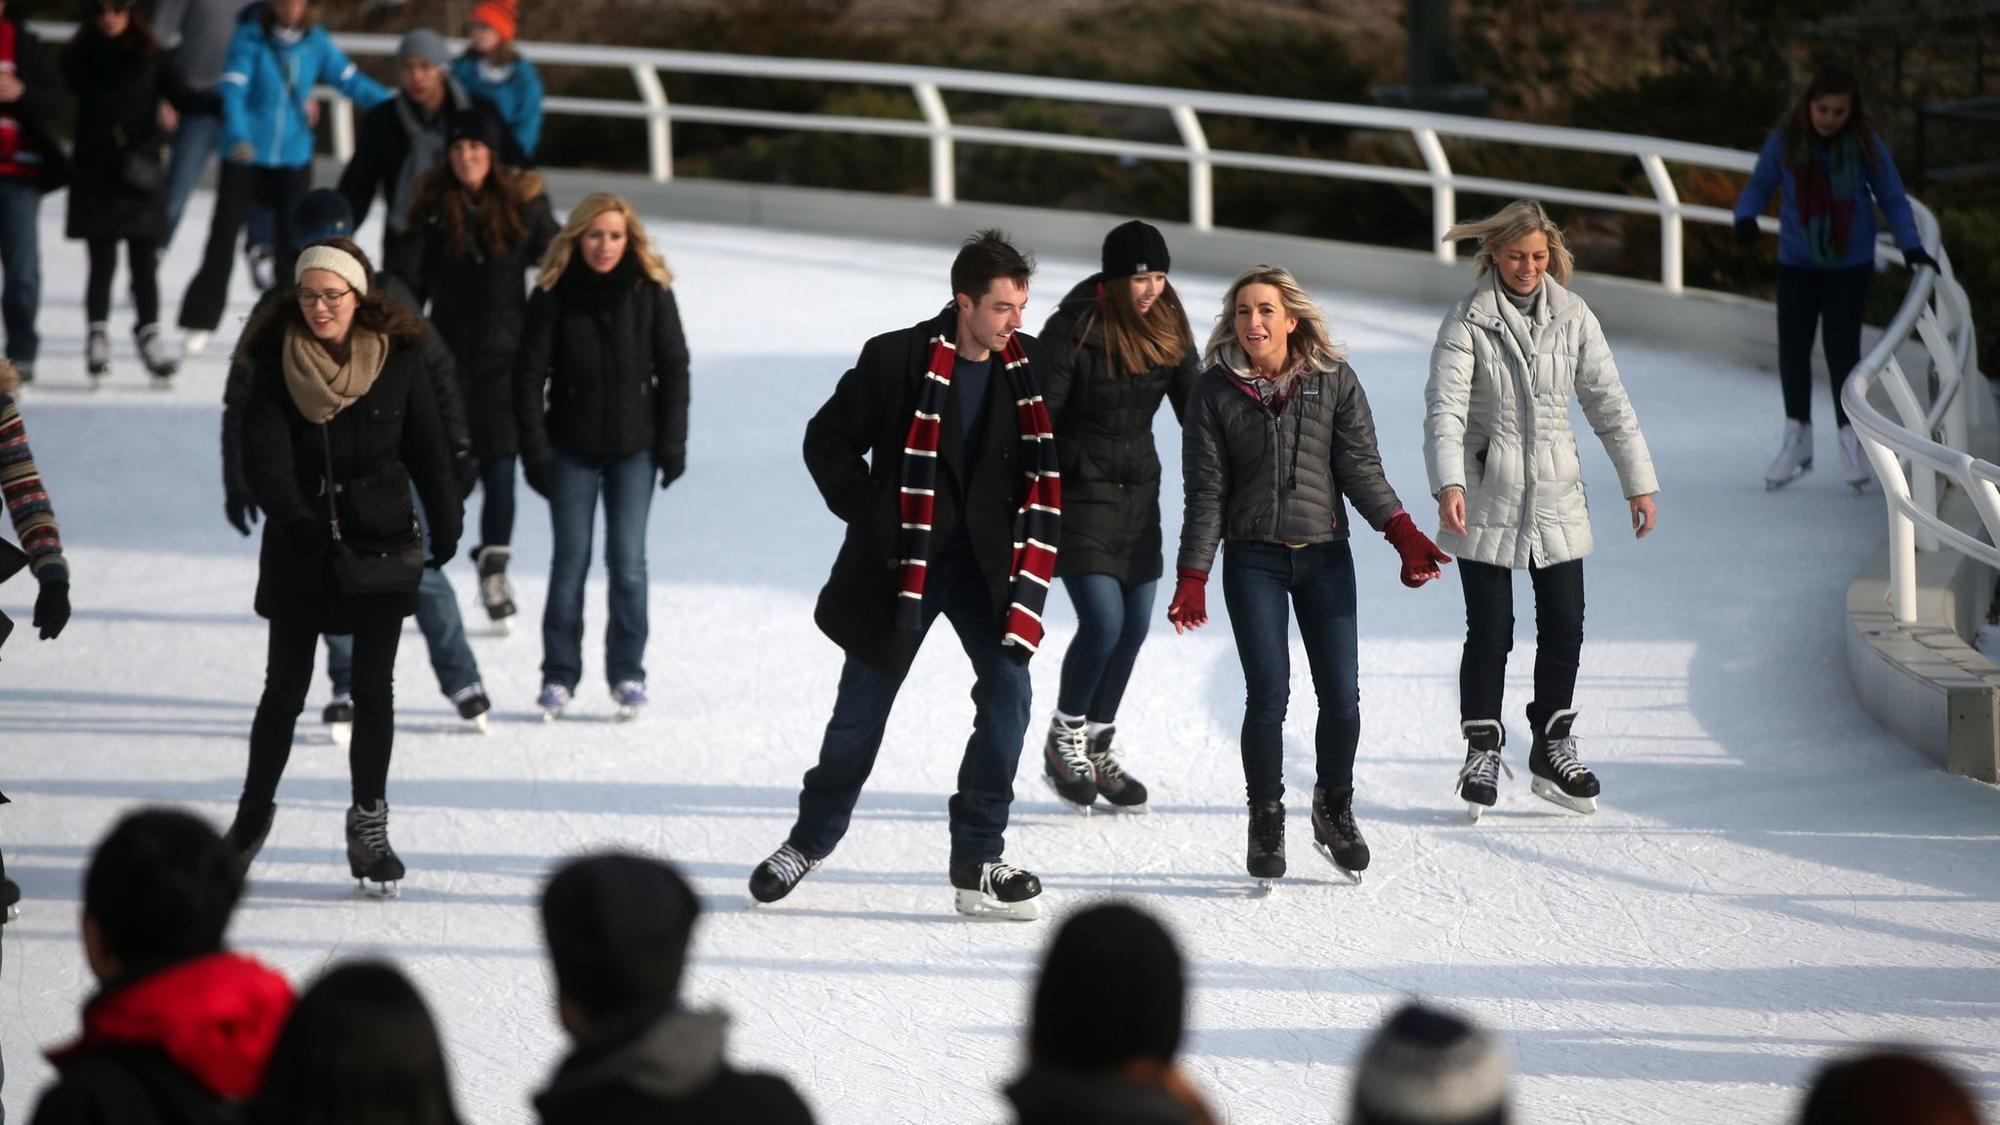 Chicago date idea: Ice skating then hot chocolate - RedEye Chicago